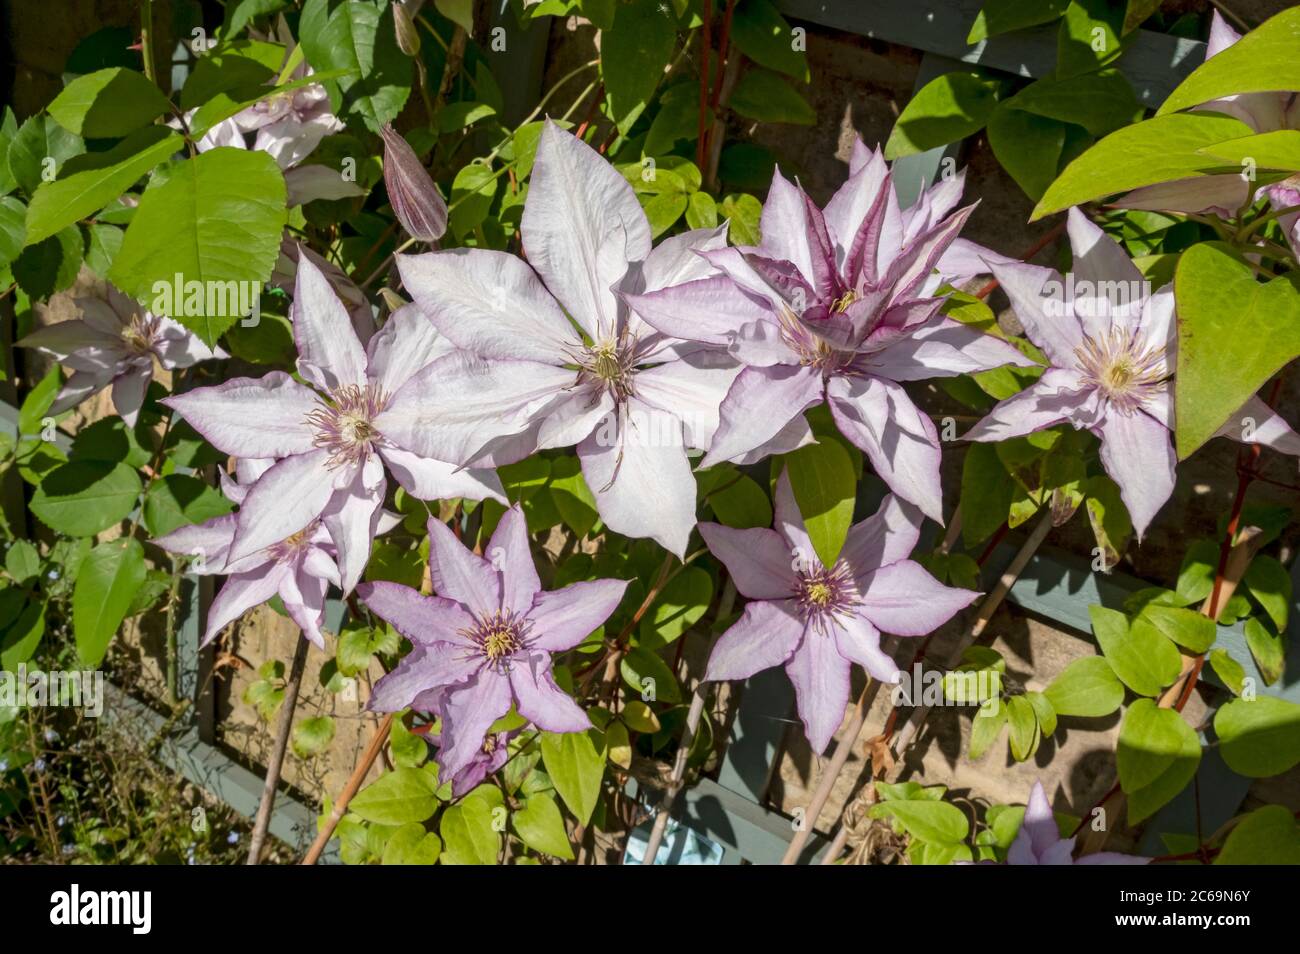 Close up of climbing climber clematis 'Samaritan Jo' plant flowers flowering on a trellis fence on a wall in the garden England UK United Kingdom GB Stock Photo